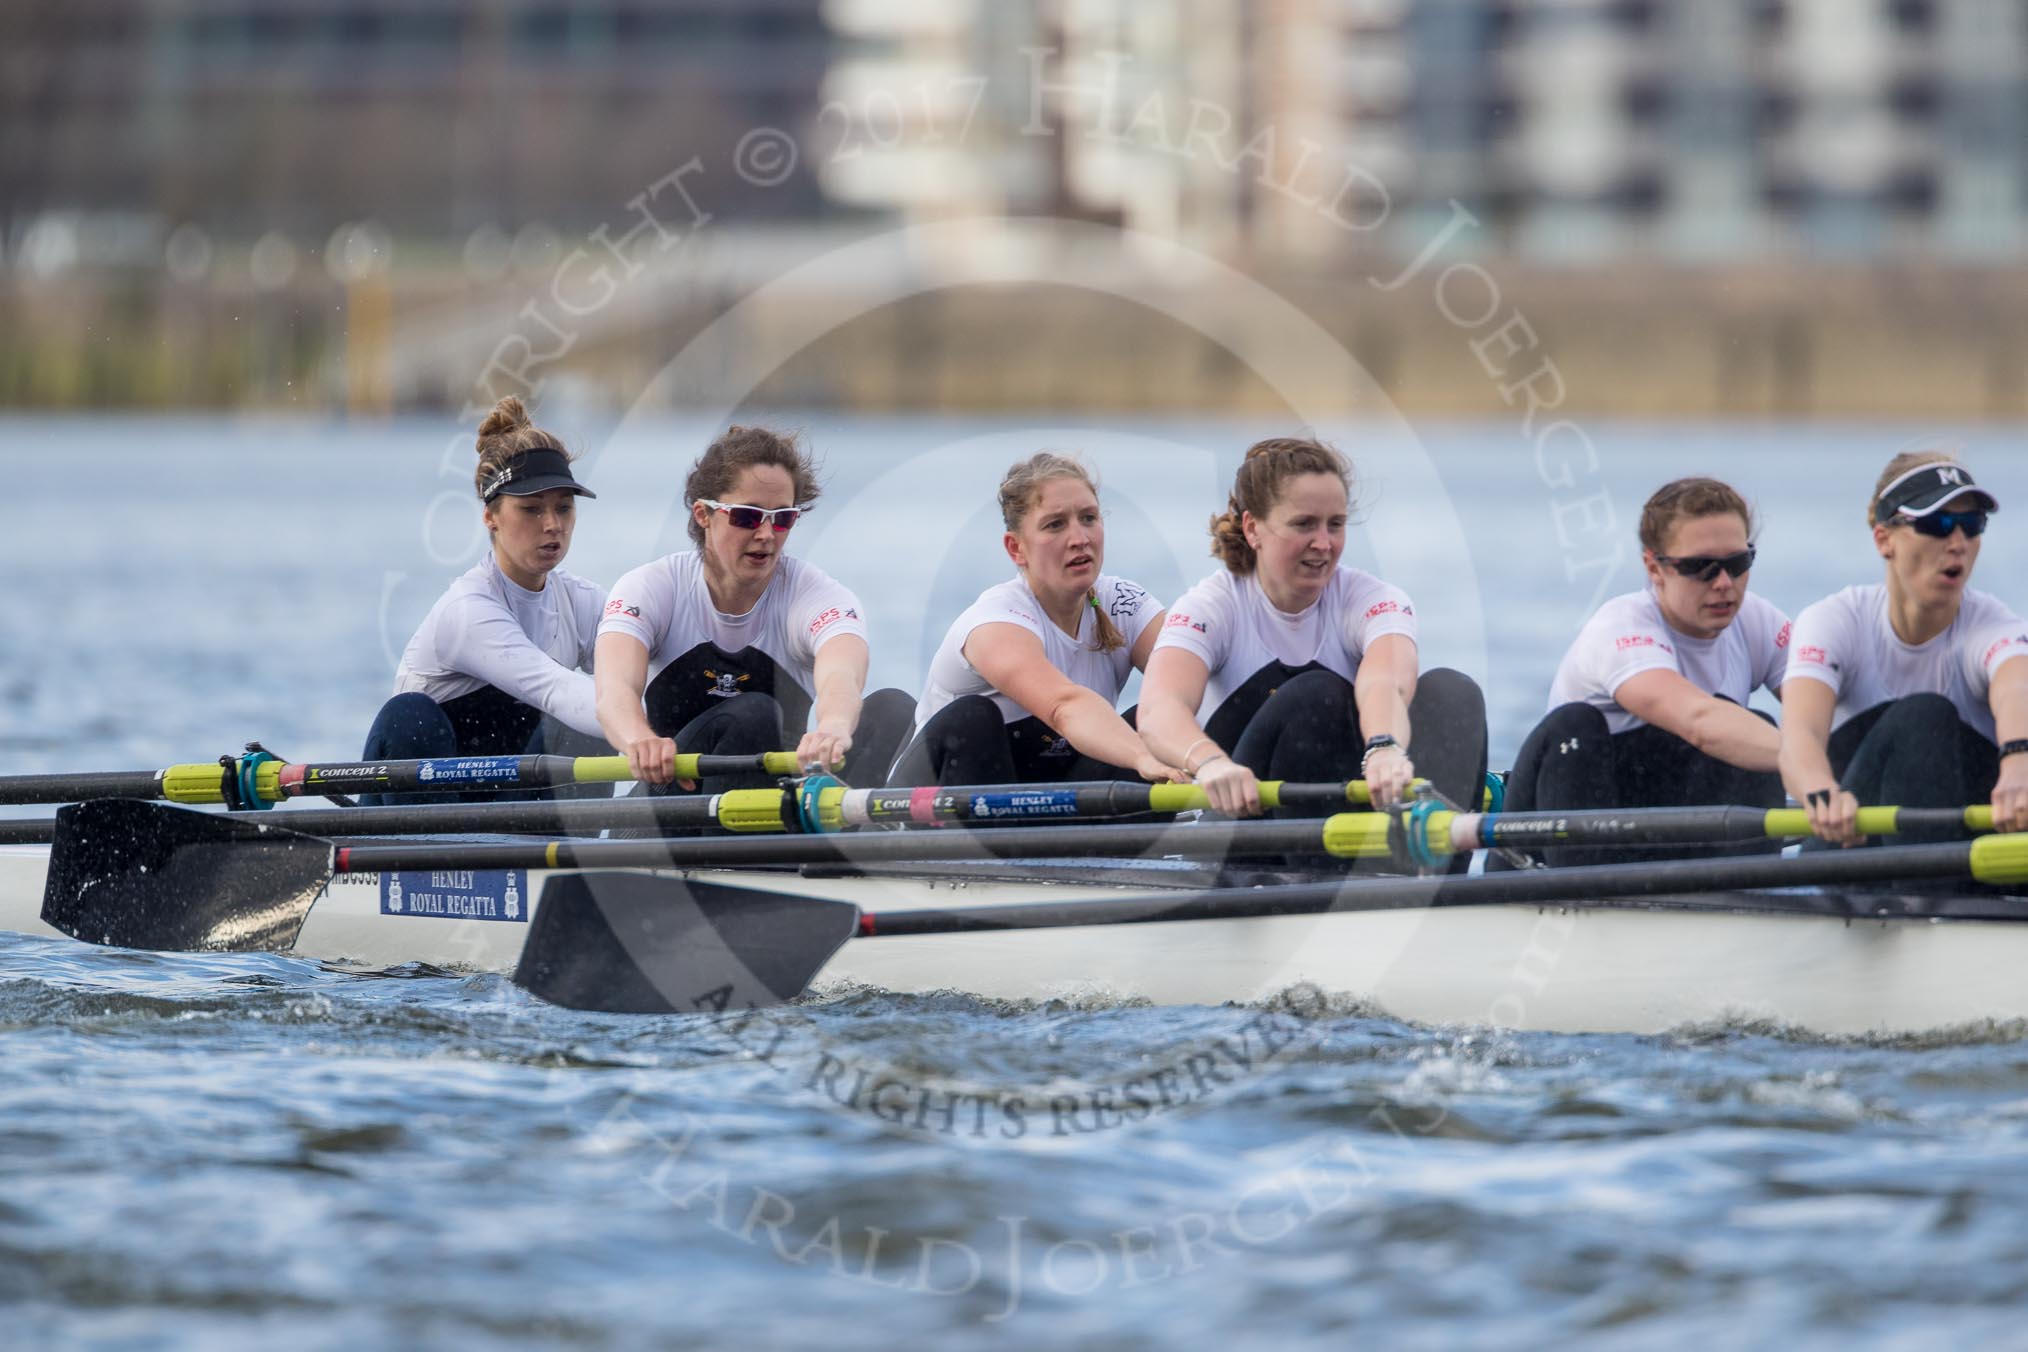 The Cancer Research UK Boat Race season 2017 - Women's Boat Race Fixture OUWBC vs Molesey BC: Molesey in the early phase of the race - bow Emma McDonald, 2 Caitlin Boyland, 3 Lucy Primmer, 4 Claire McKeown, 5 Katie Bartlett, 6 Elo Luik.
River Thames between Putney Bridge and Mortlake,
London SW15,

United Kingdom,
on 19 March 2017 at 16:03, image #61